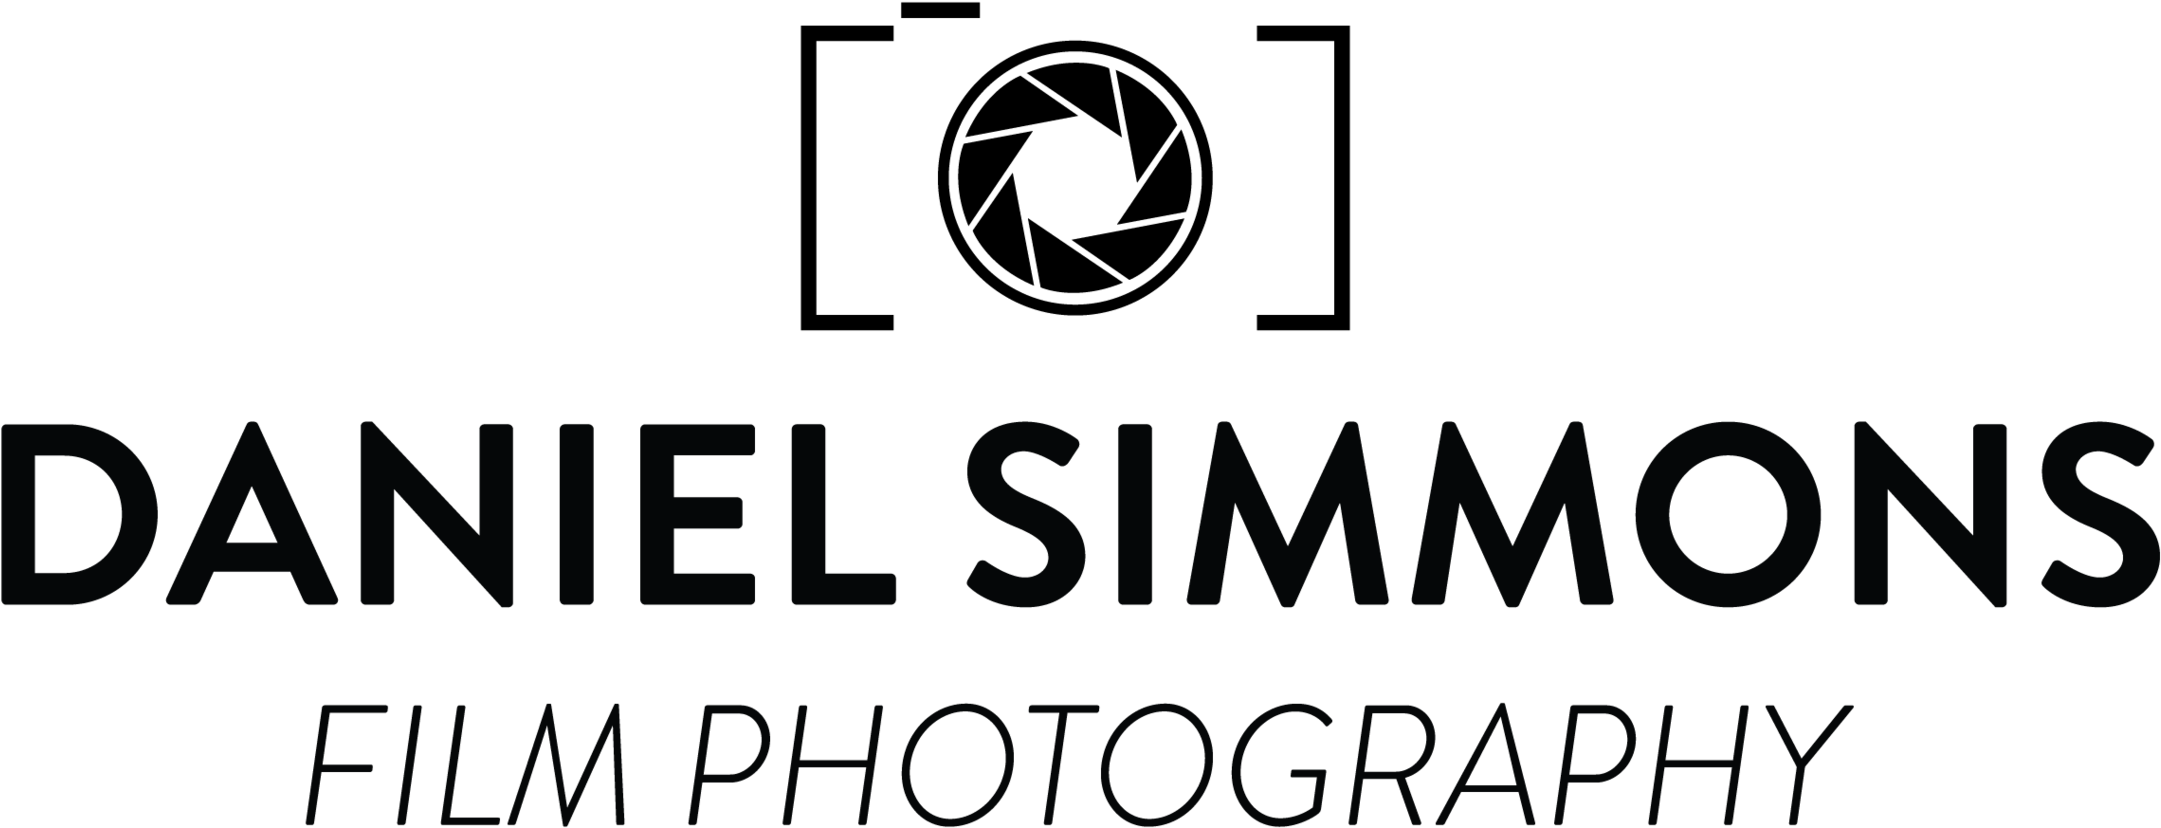 Free Photography Logo Png Download, Download Free Photography Logo Png ...